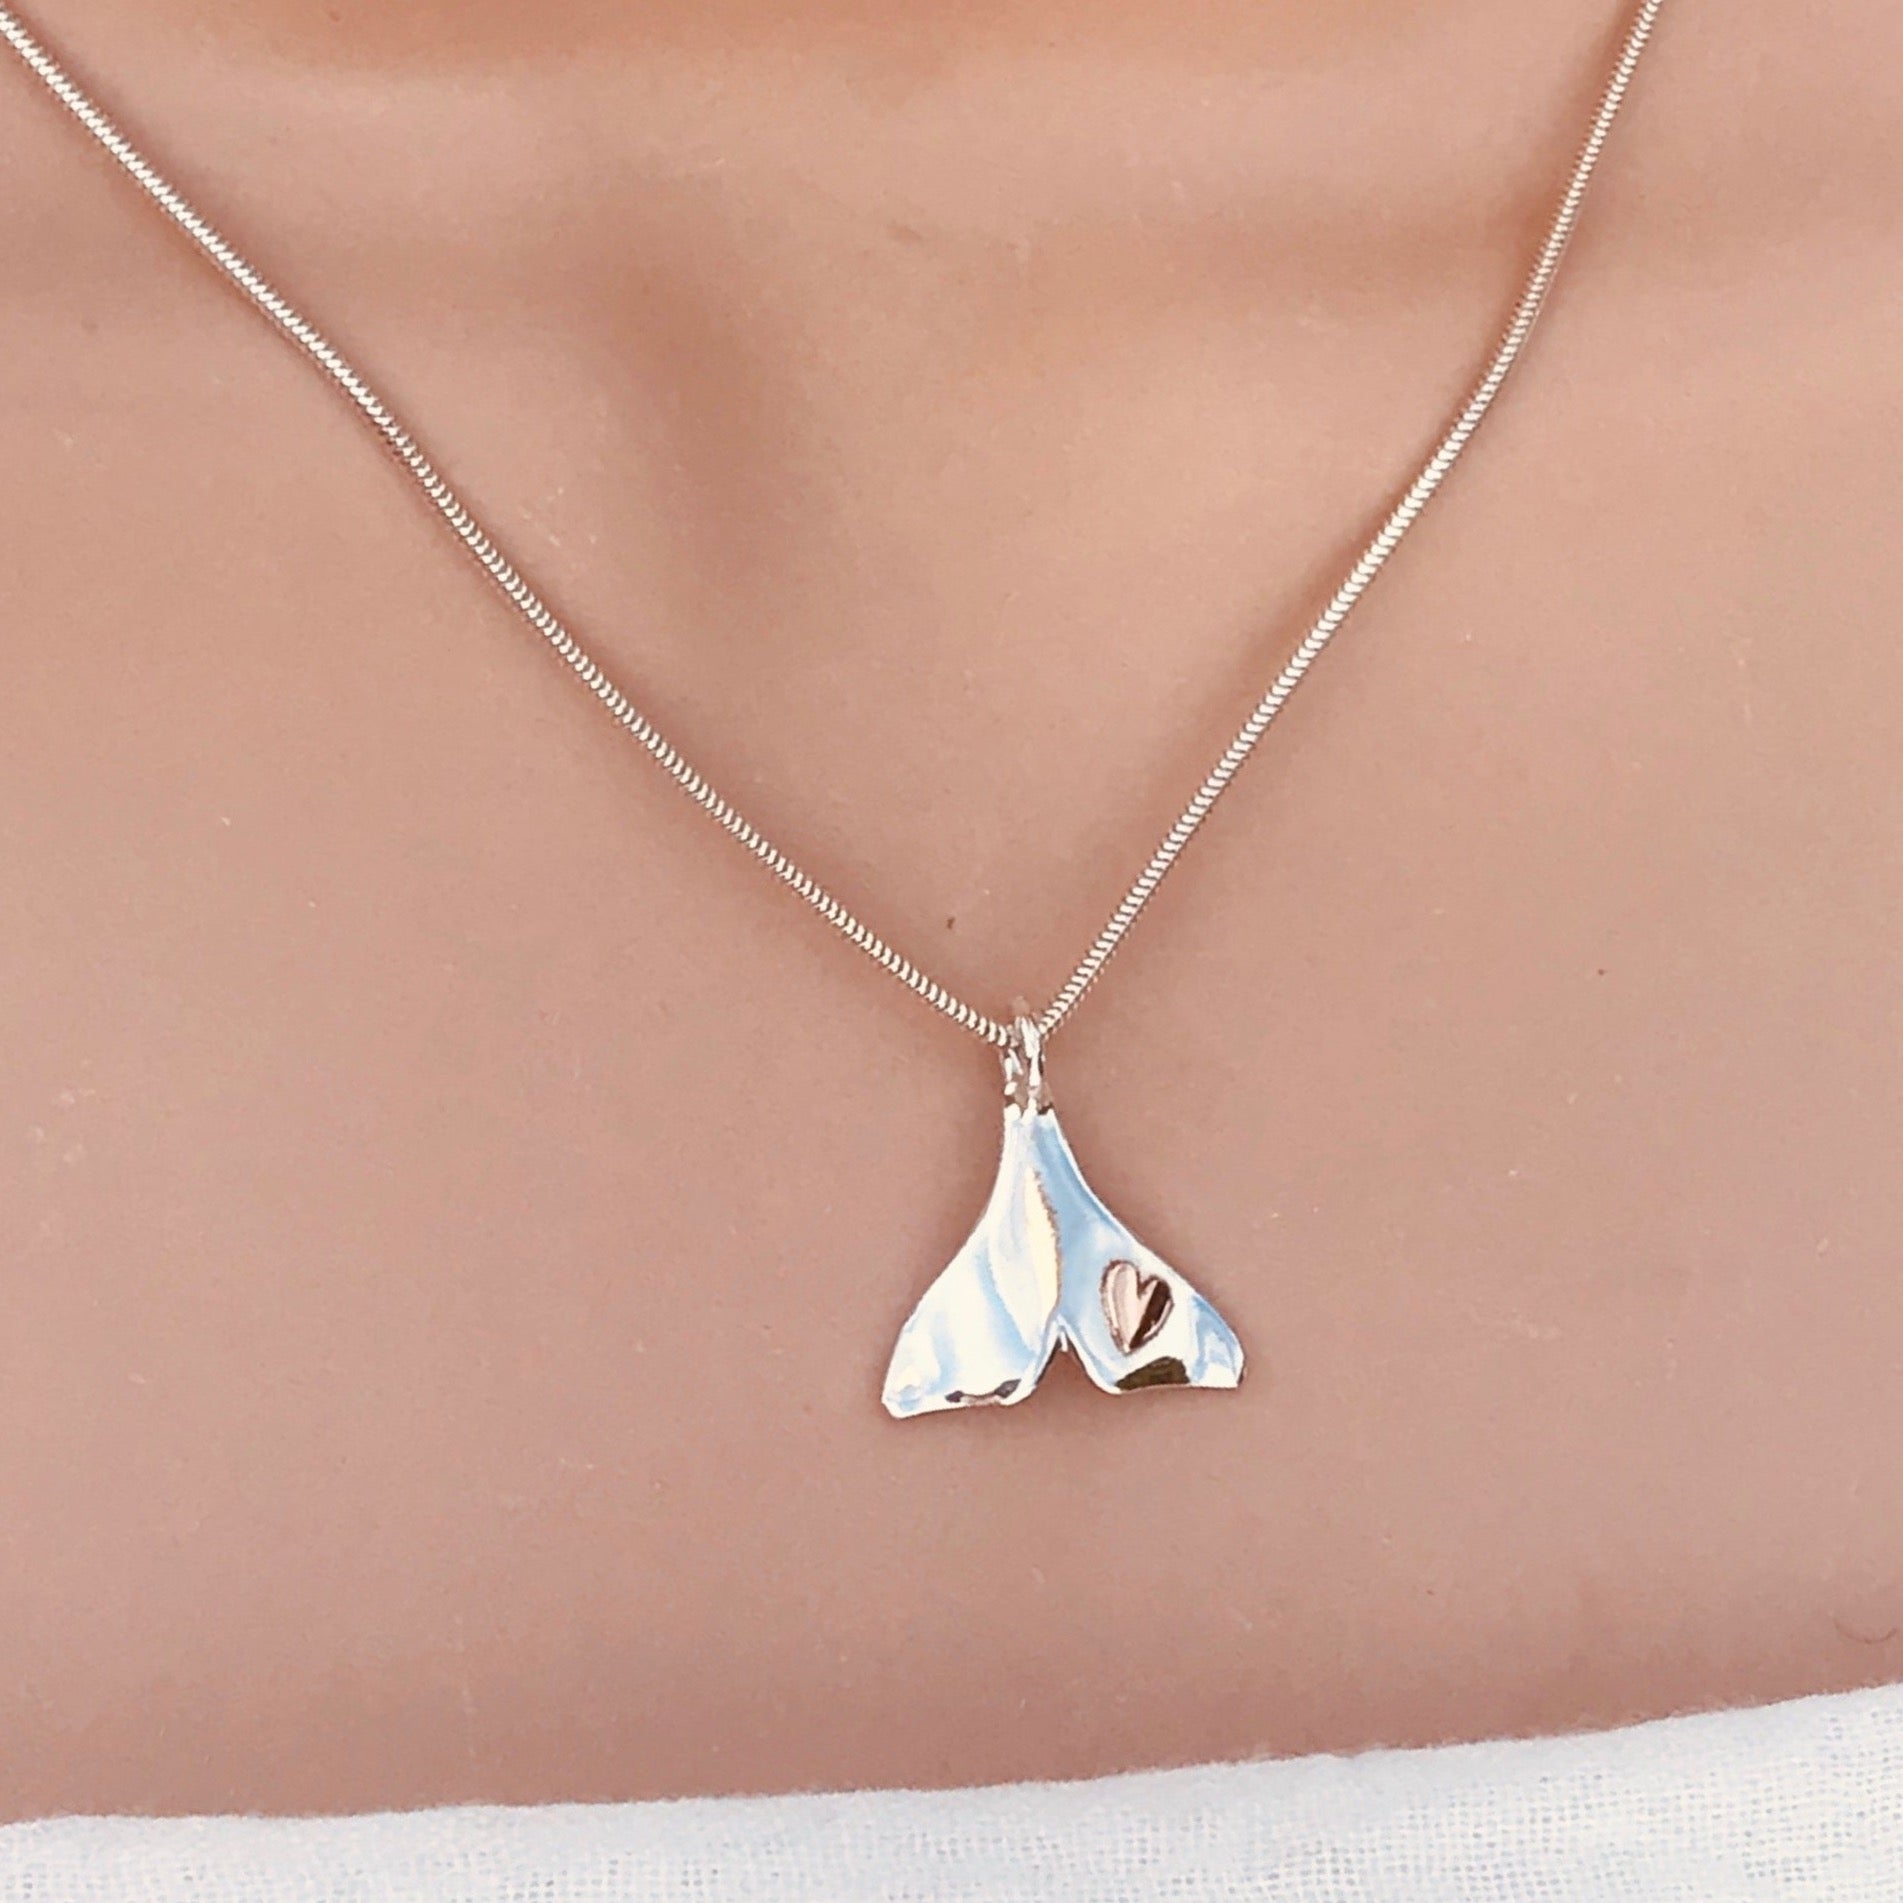 Dolphin tail necklace with heart